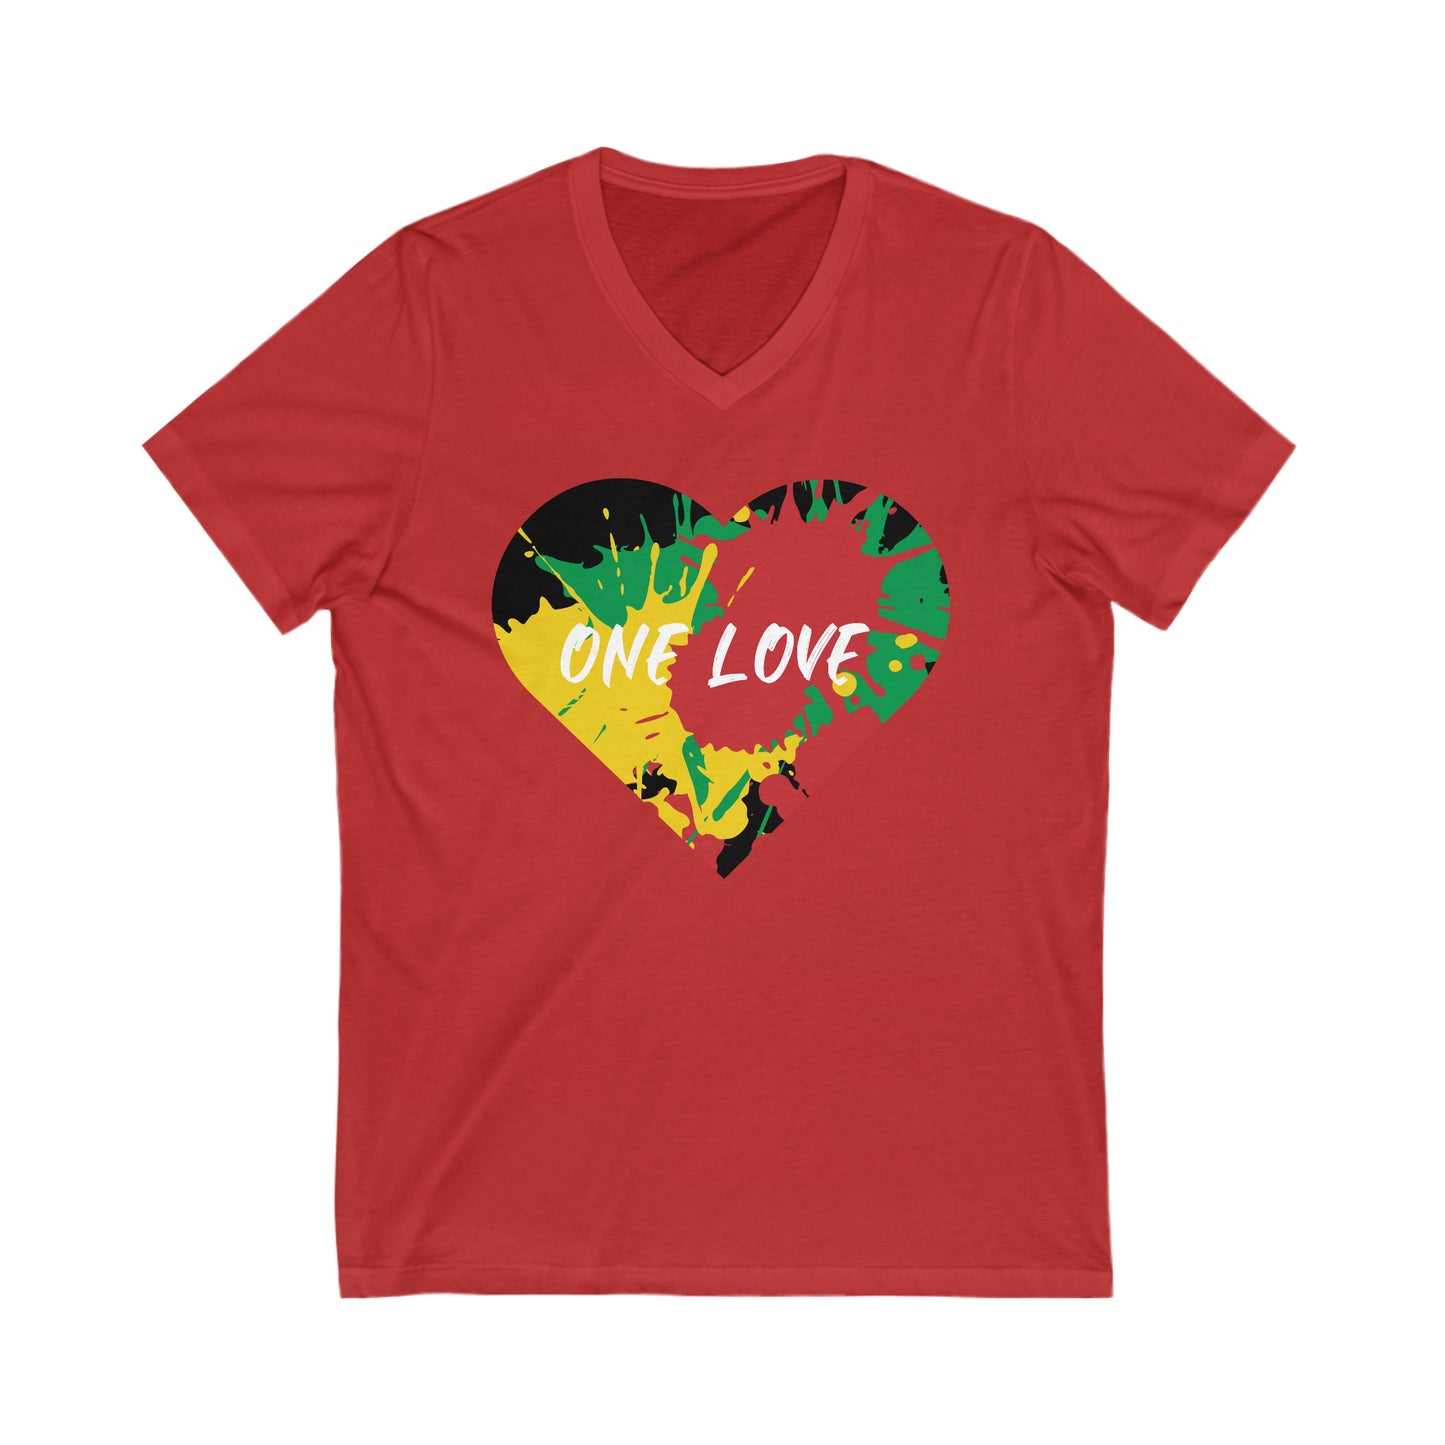 RED GREEN AND GOLD GRAPHIC V NECK UNISEX T SHIRT